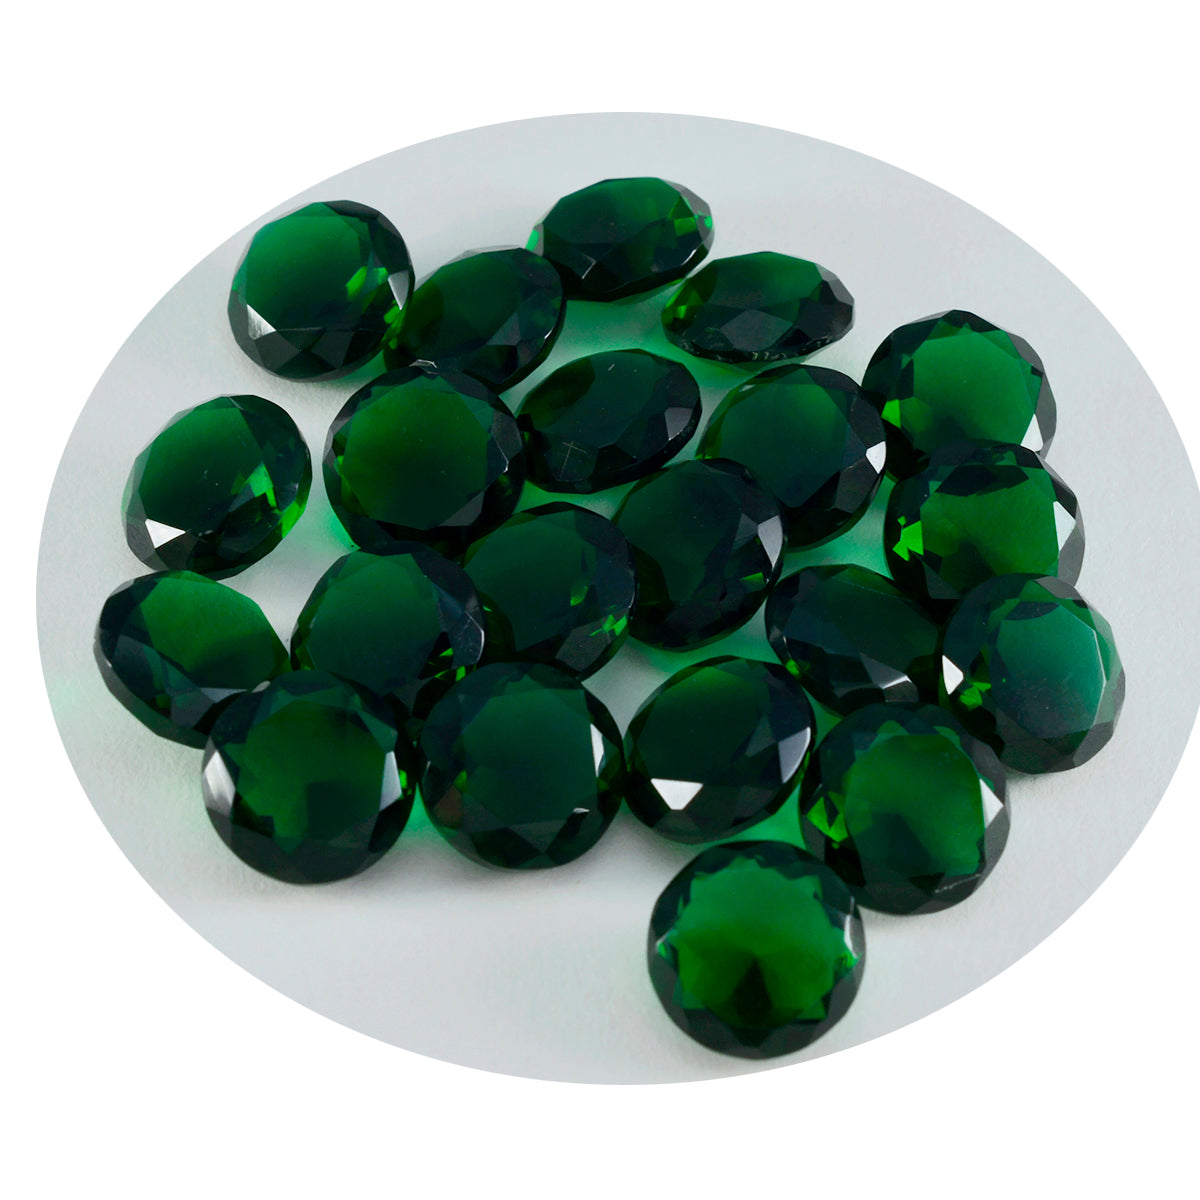 Riyogems 1PC Green Emerald CZ Faceted 10x10 mm Round Shape A+1 Quality Loose Stone